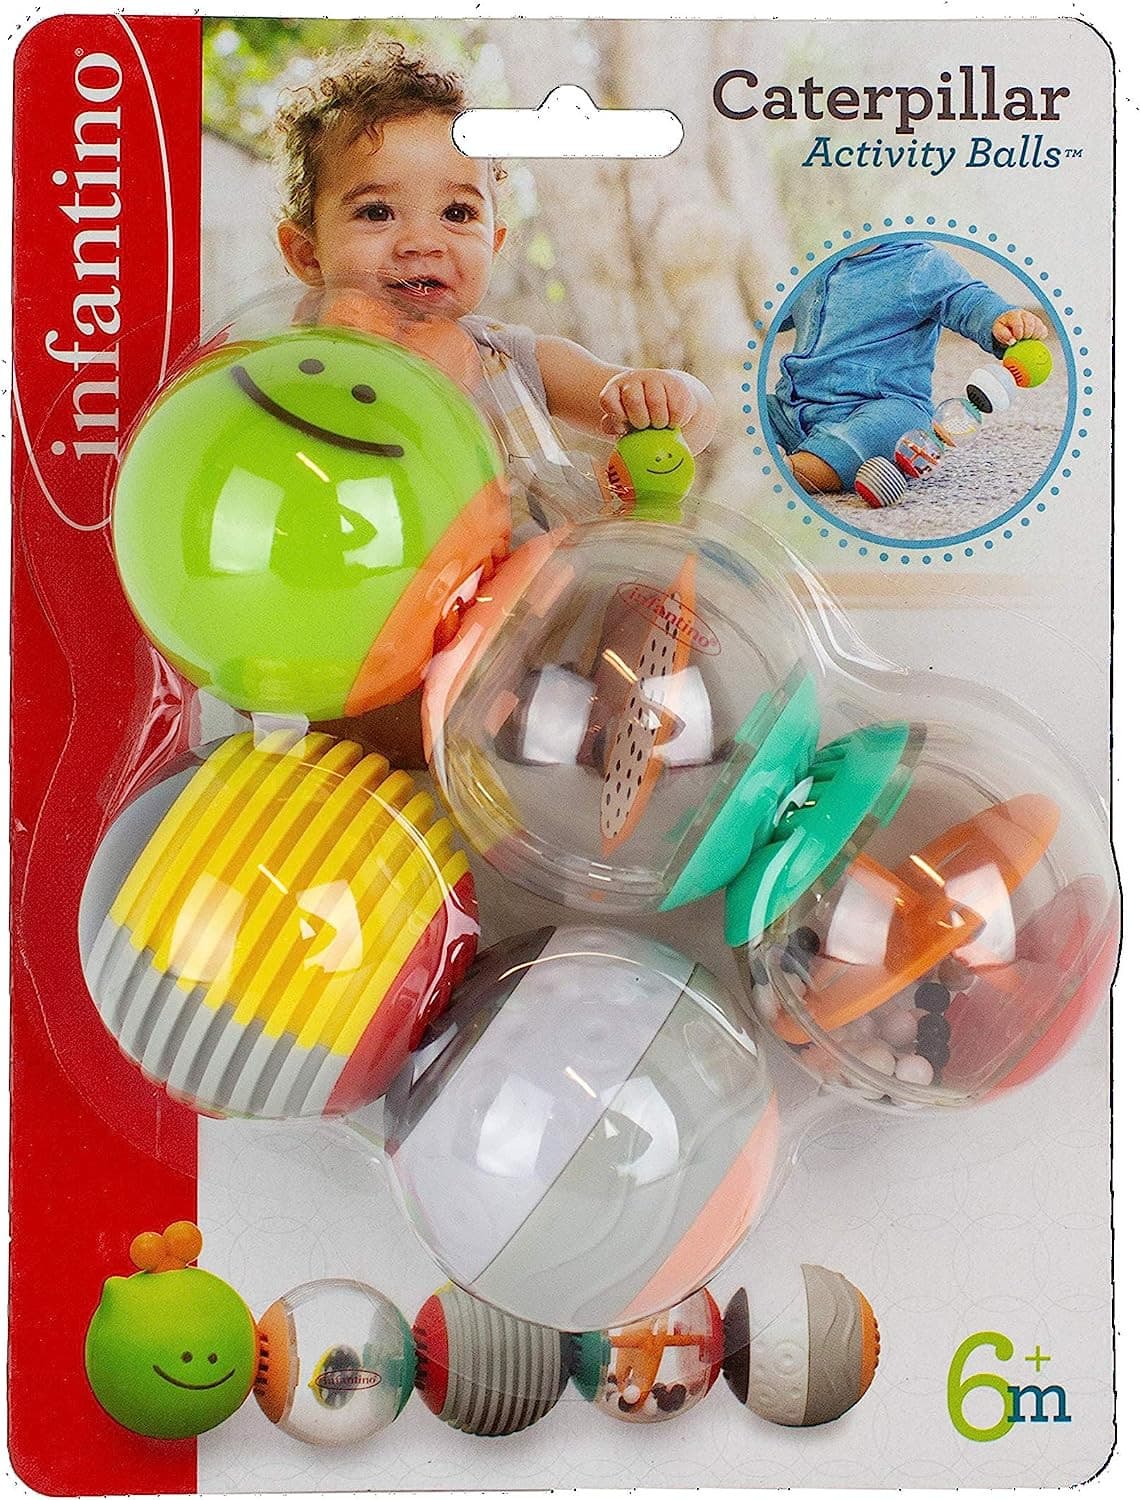 Infantino Caterpillar Activity Balls Baby Activity, Learning and Developing Toys.